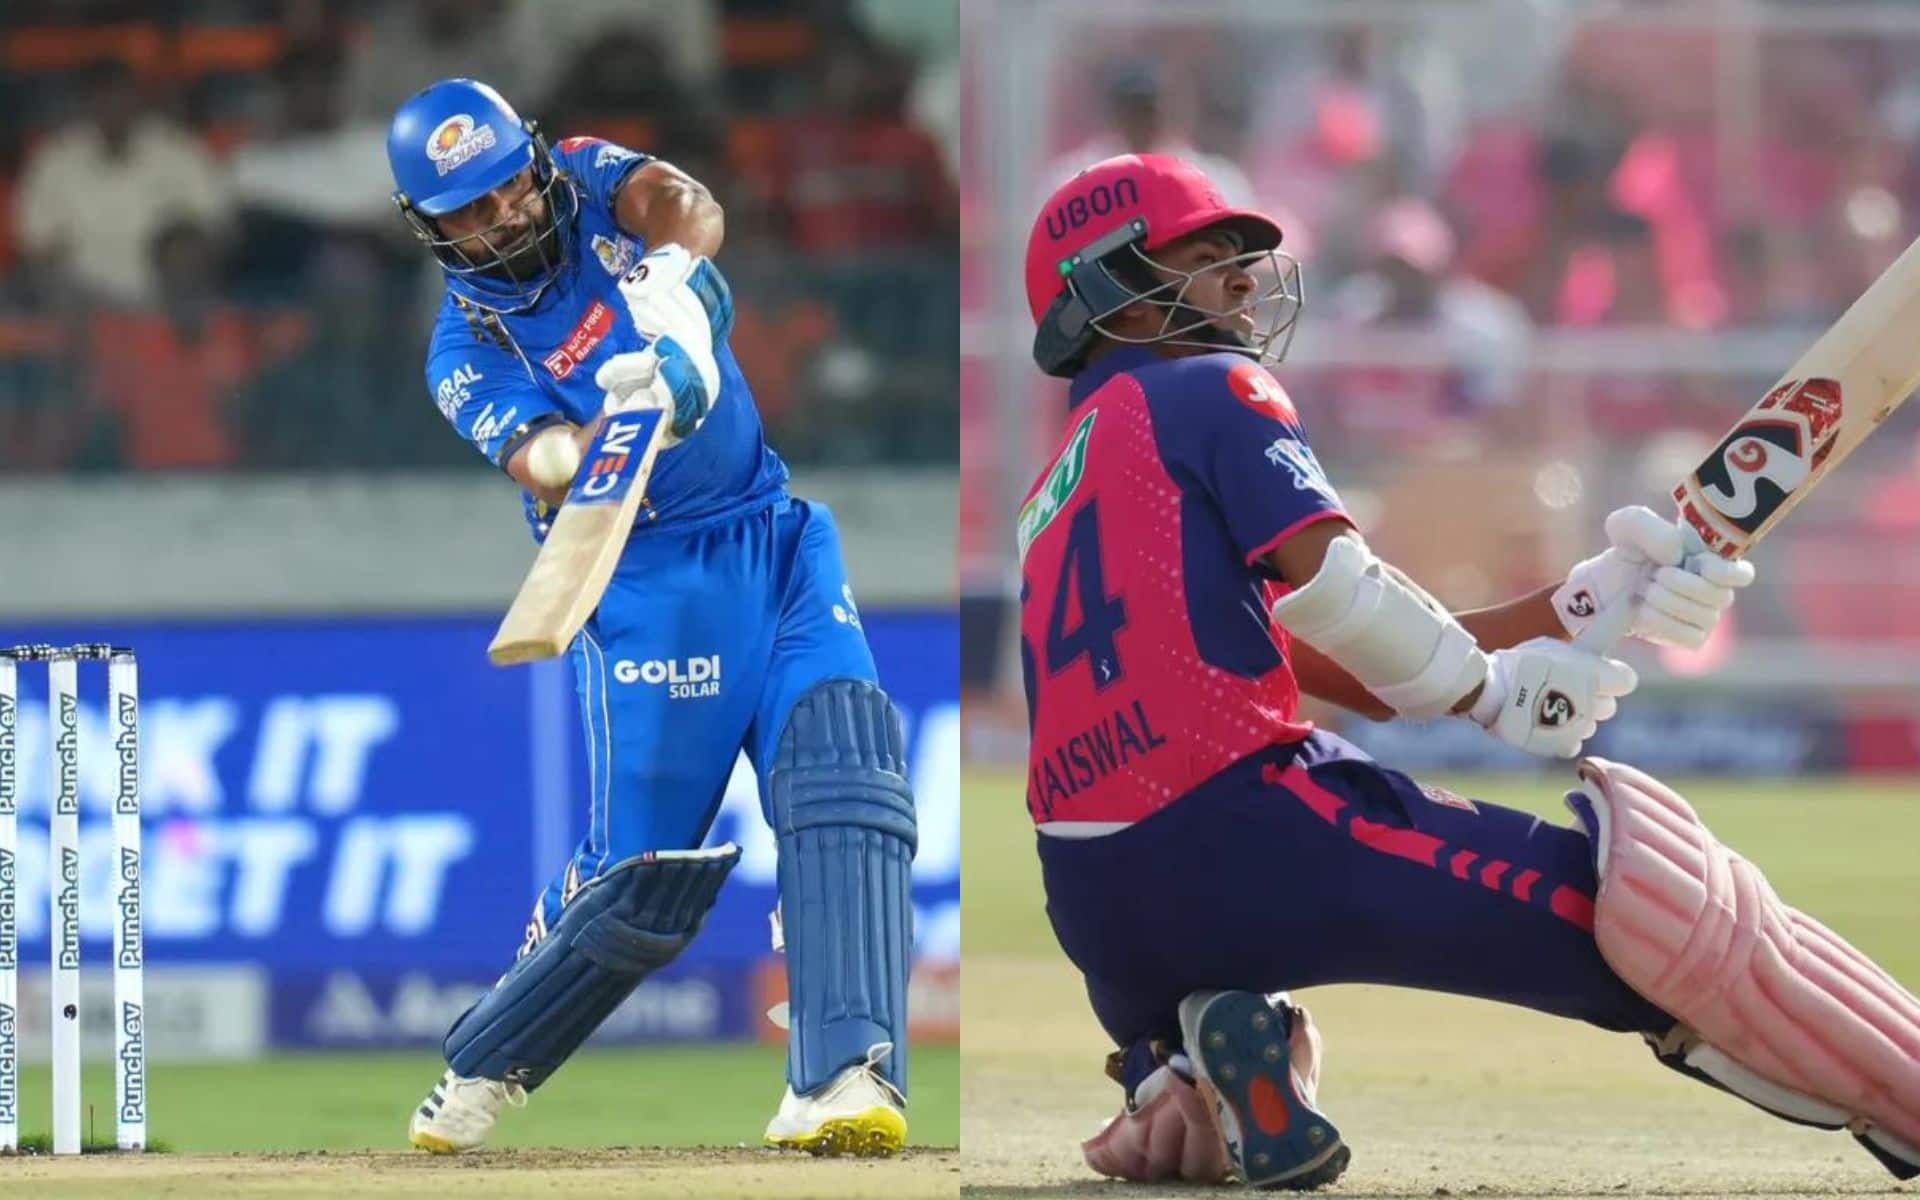 Rohit Sharma and Yashasvi Jaiswal would be crucial for their teams in the match [iplt20.com]